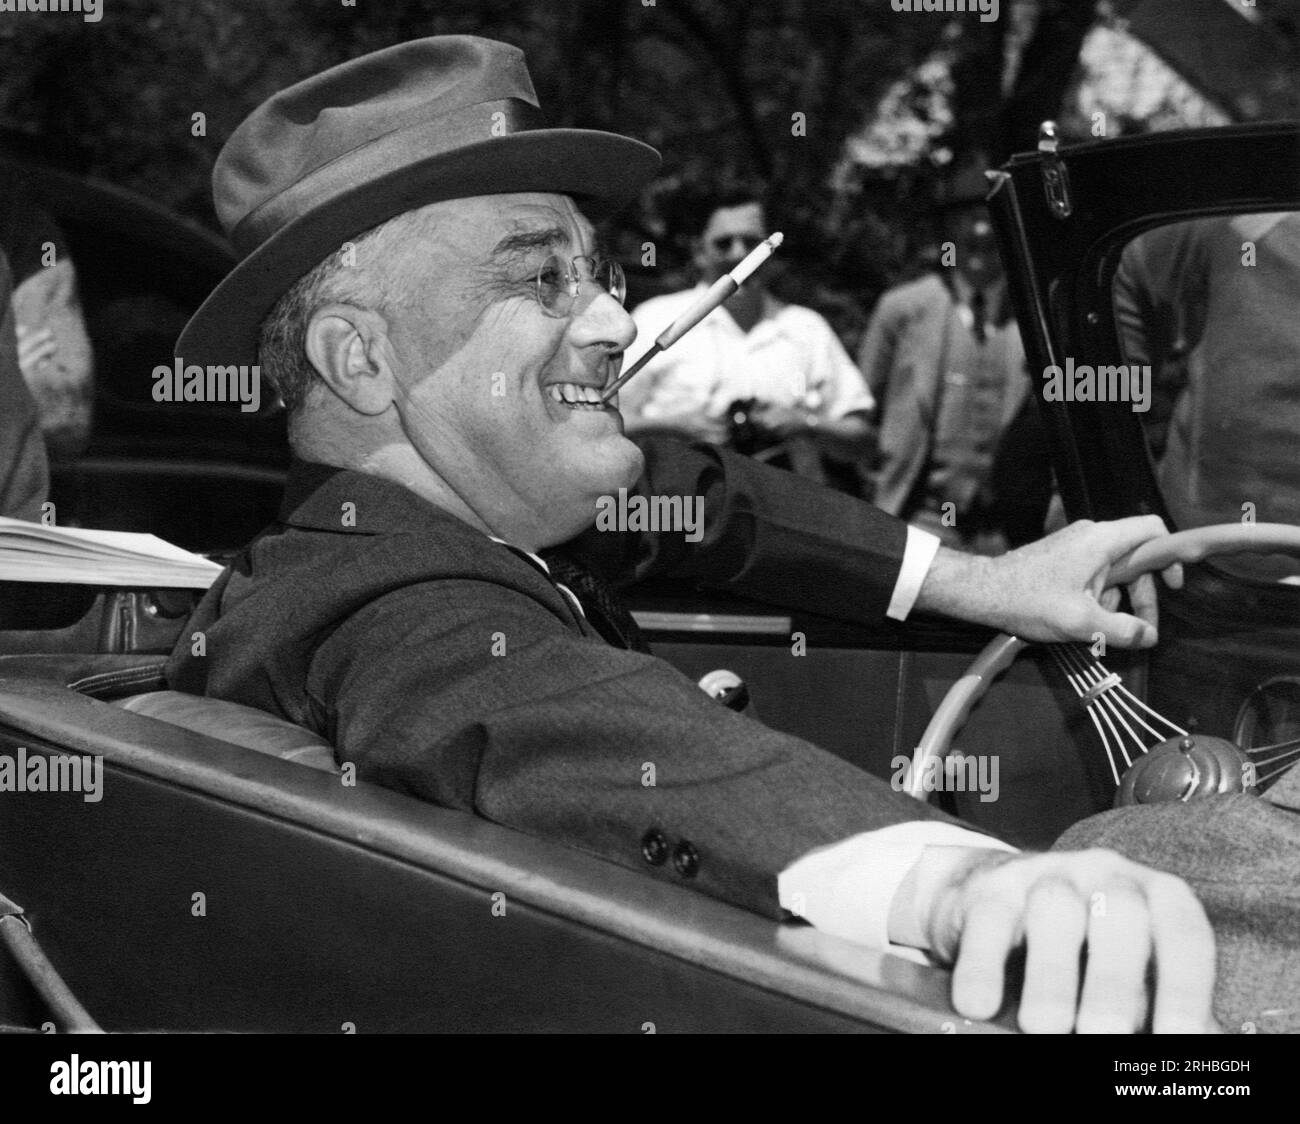 Warm Springs, Georgia:  1939. With a cigarette in a holder clenched in his teeth, a smiling Franklin Delano Roosevelt sits jauntily at the wheel of his convertible. Stock Photo